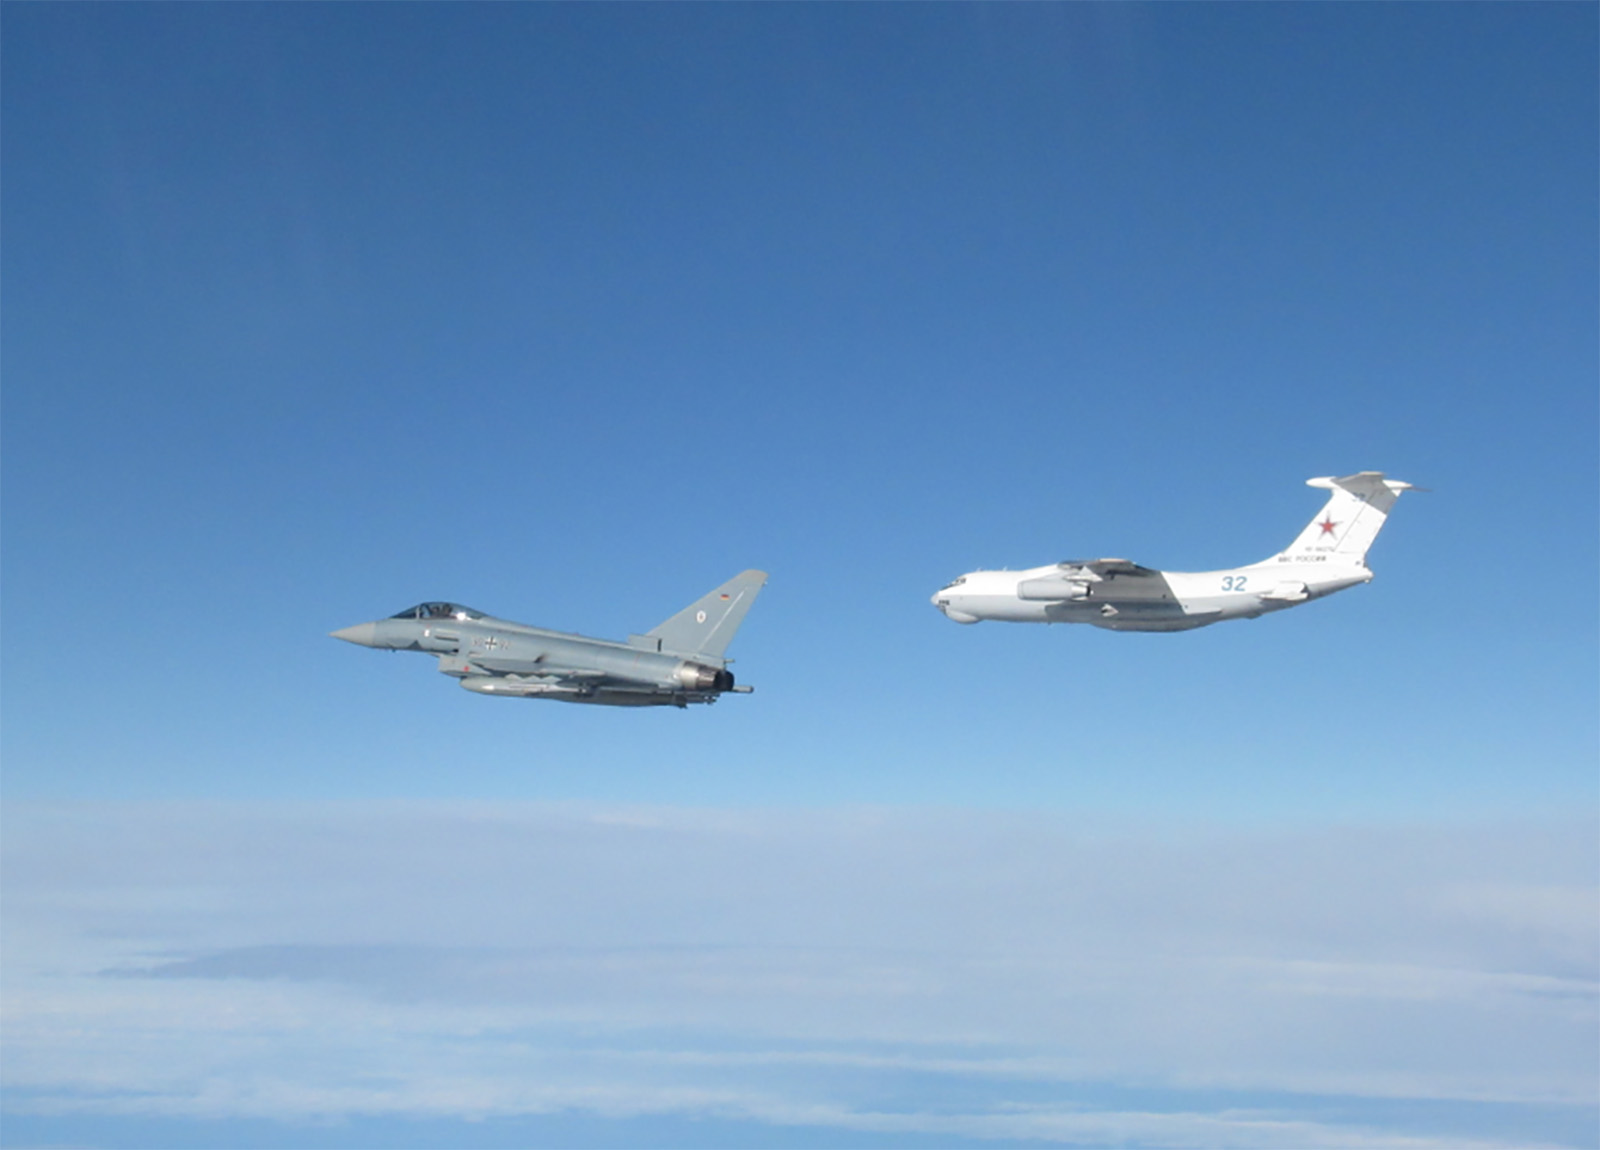 RAF and German Air Force Typhoons intercept a Russian aircraft in their first joint NATO air policing scramble in the handout image dated March 15.